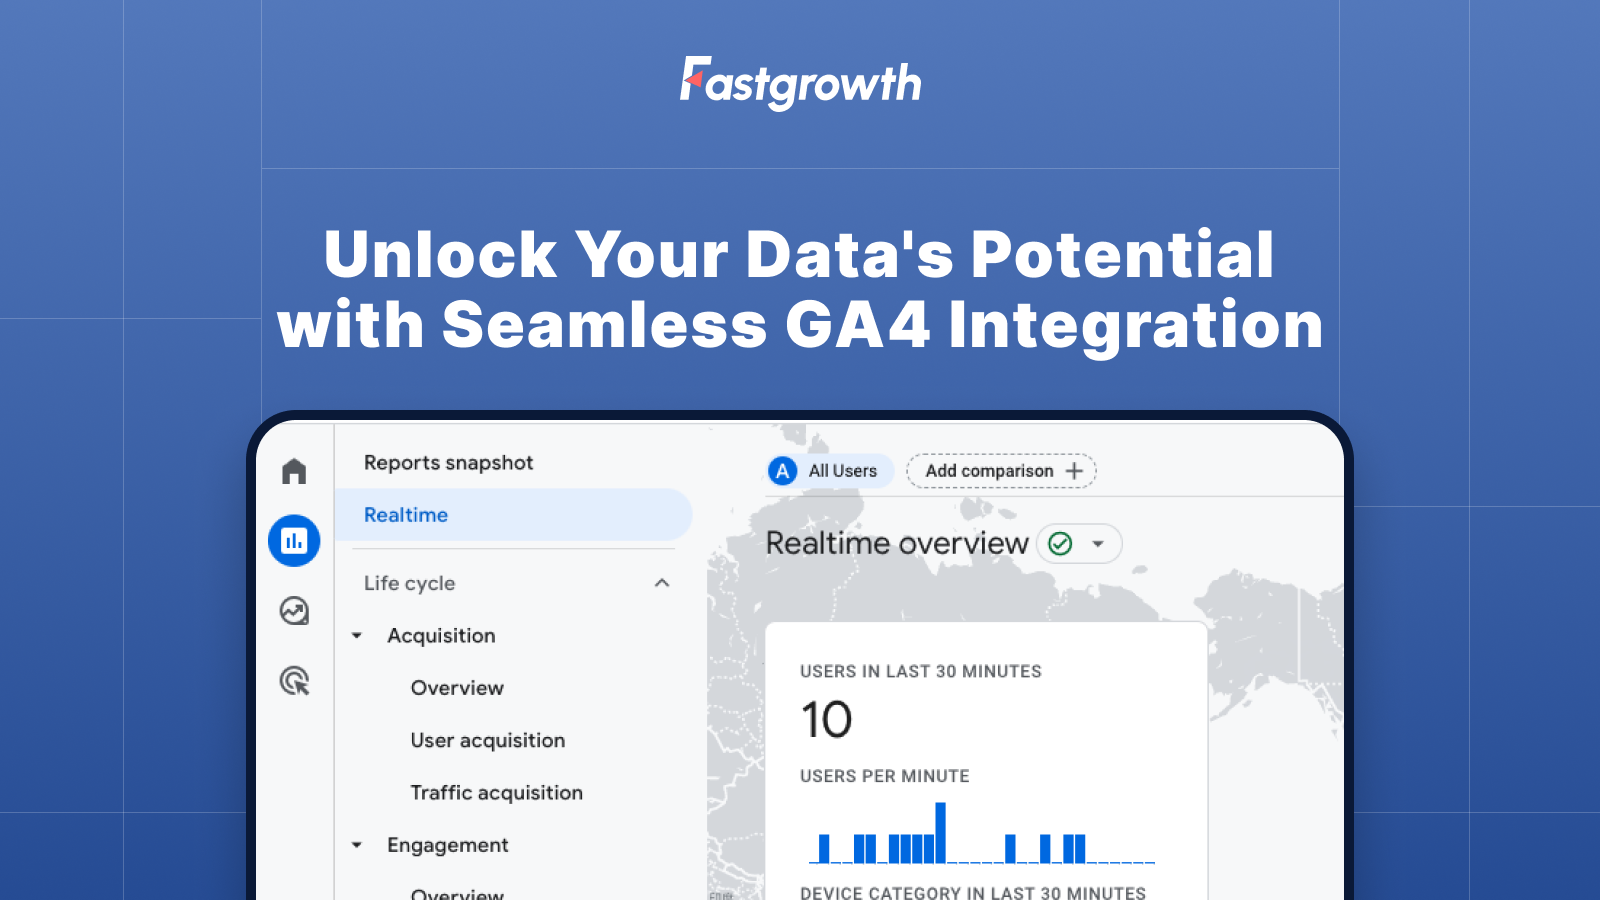 Unlock Your Data's Potential with Seamless Google Analytics 4